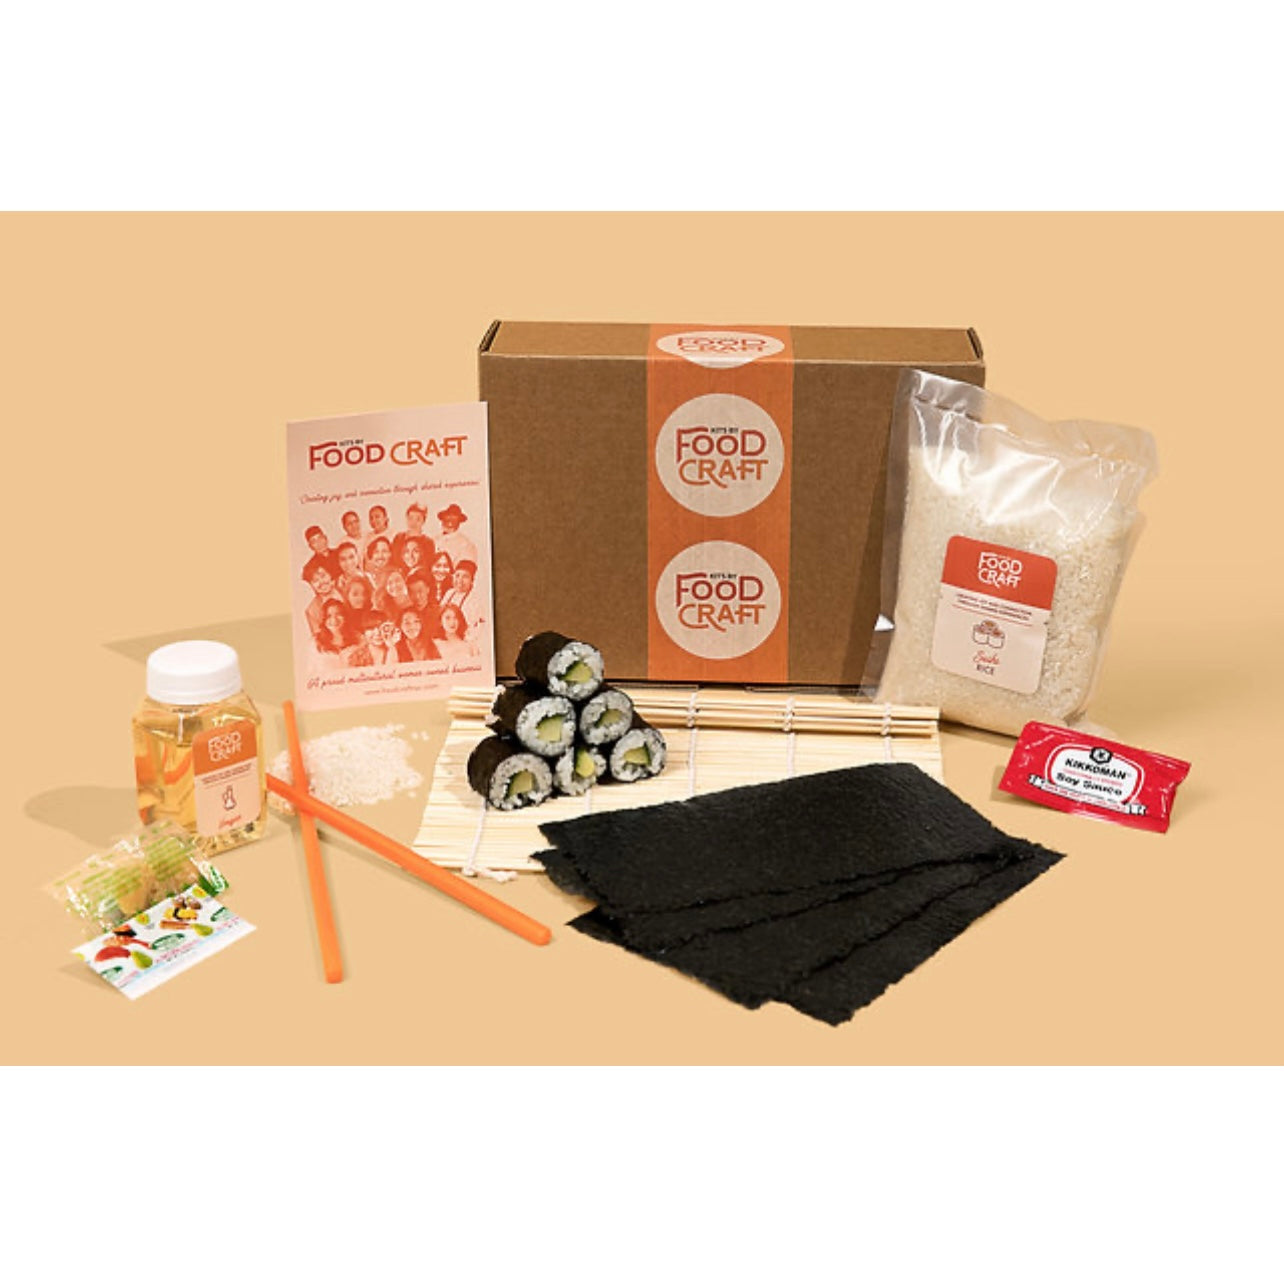 https://www.sarapnow.com/cdn/shop/products/kits-by-food-craft-food-beverage-all-inclusive-shiitake-sushi-making-kit-diy-kit-vegetarian-includes-miso-soup-10-rolls-spicy-mayo-all-inclusive-shiitake-sushi-making-kit-diy-kit-vege_418048c0-48e9-4ca5-9193-c986dbee7897.jpg?v=1680887038&width=1284